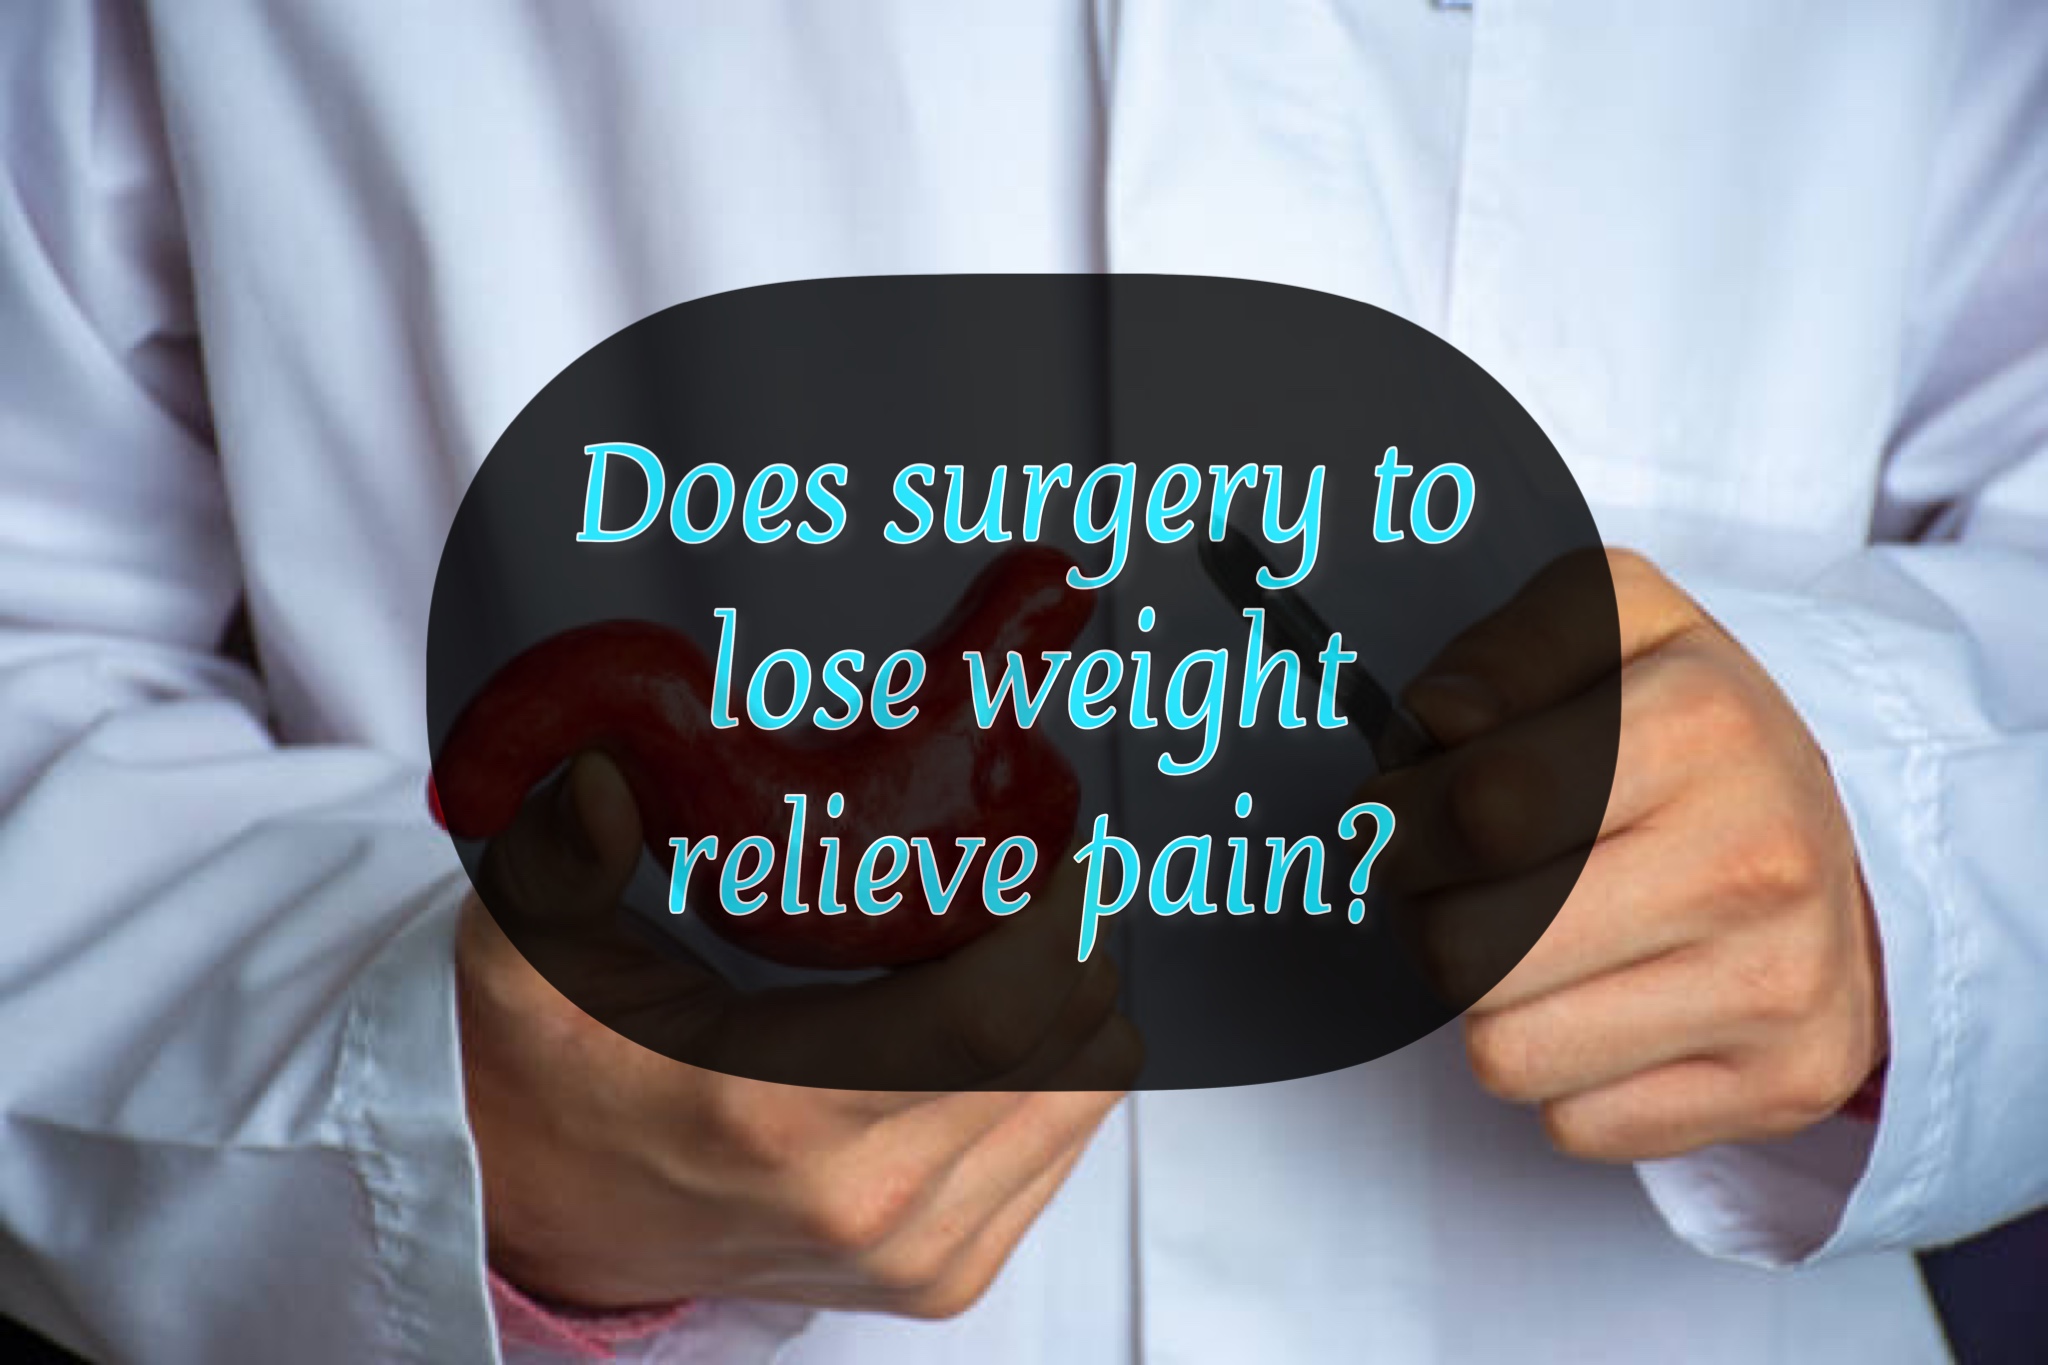 Does surgery to lose weight relieve pain?